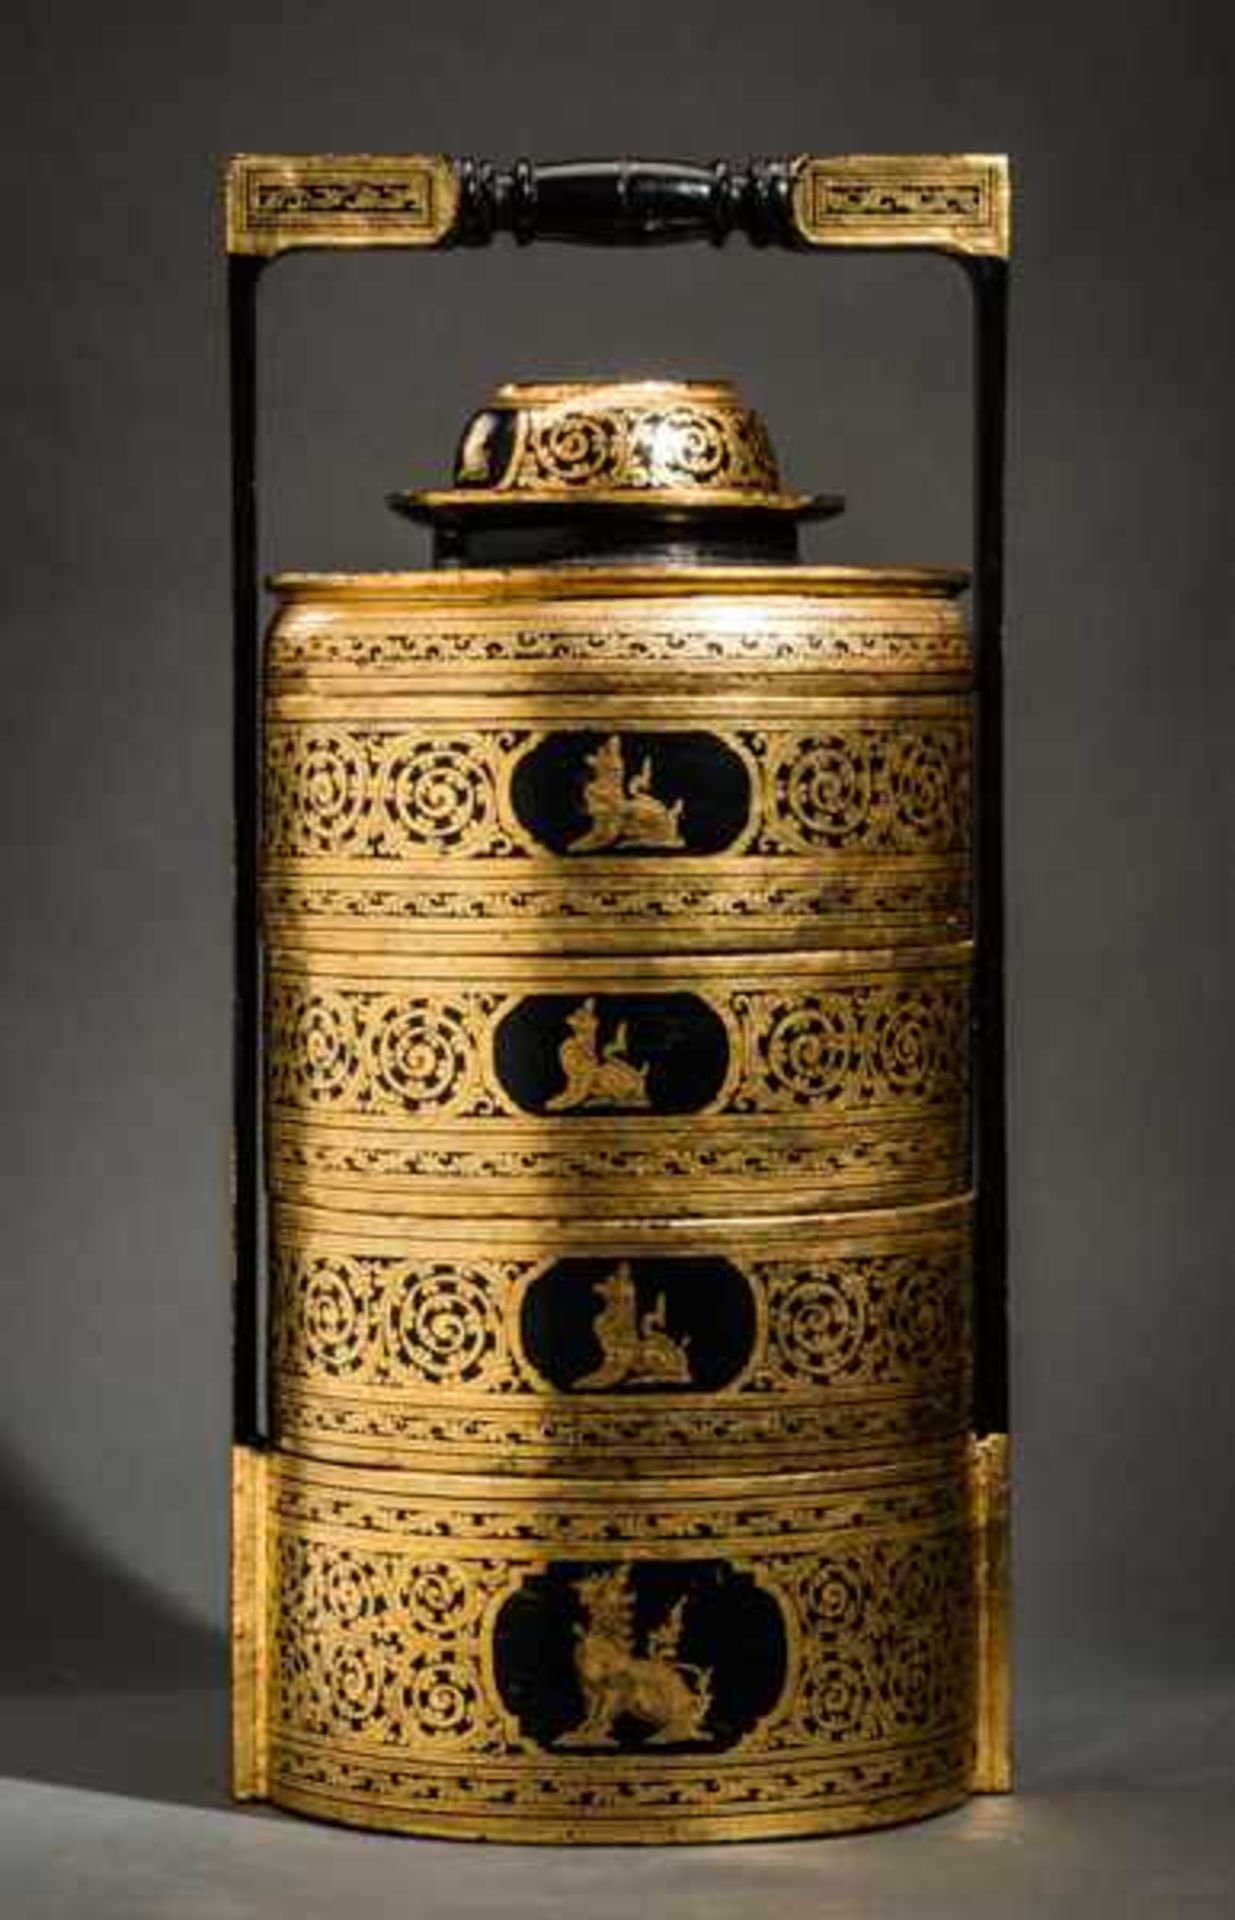 TALL MULTILAYER VESSEL Wood, bamboo, lacquer technique, gold. Burma, late Konbaung, 19th cent.Four